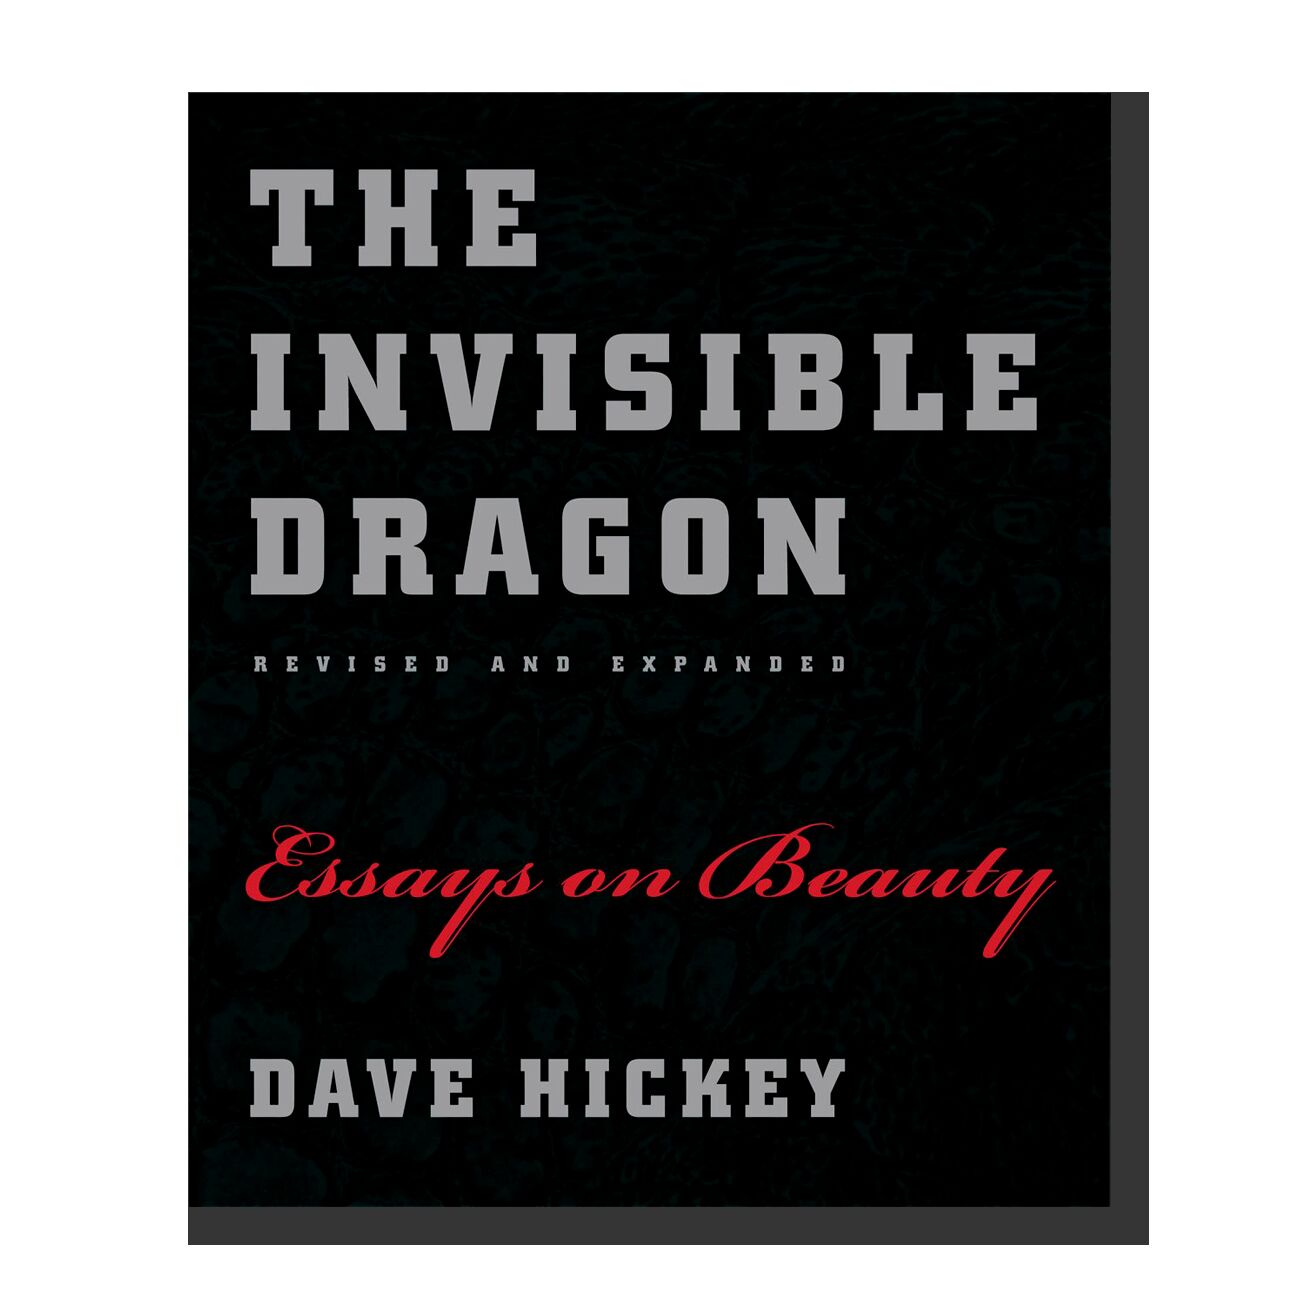 The Invisible Dragon: Essays on Beauty, Revised and Expanded